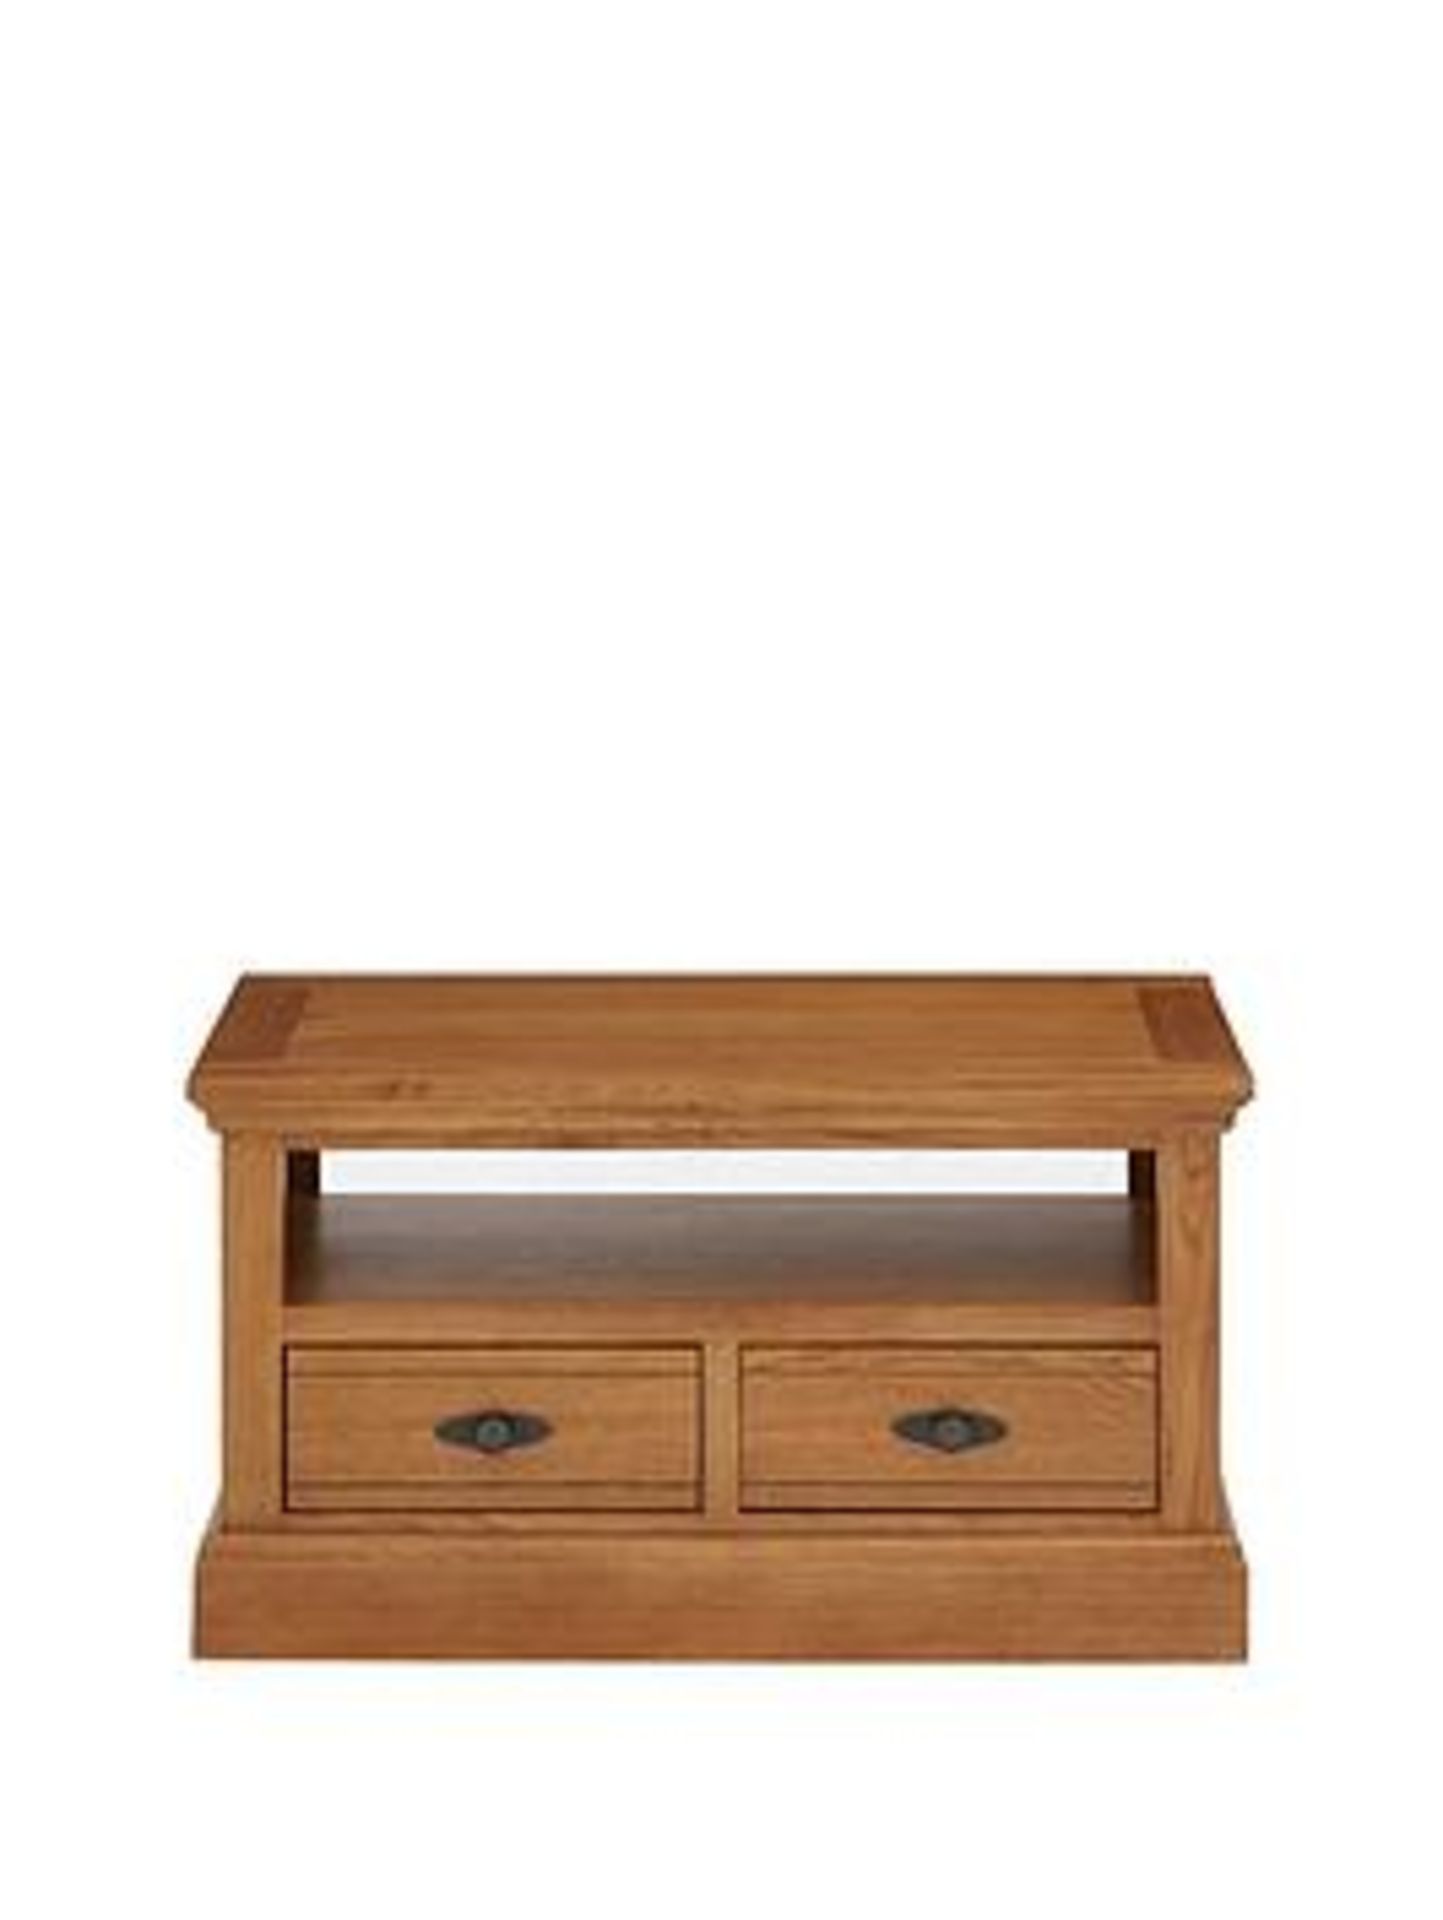 Boxed Item Ideal Home Whitford Storage Coffee Table [Oak] 85X130X40Cm Rrp:¬£339